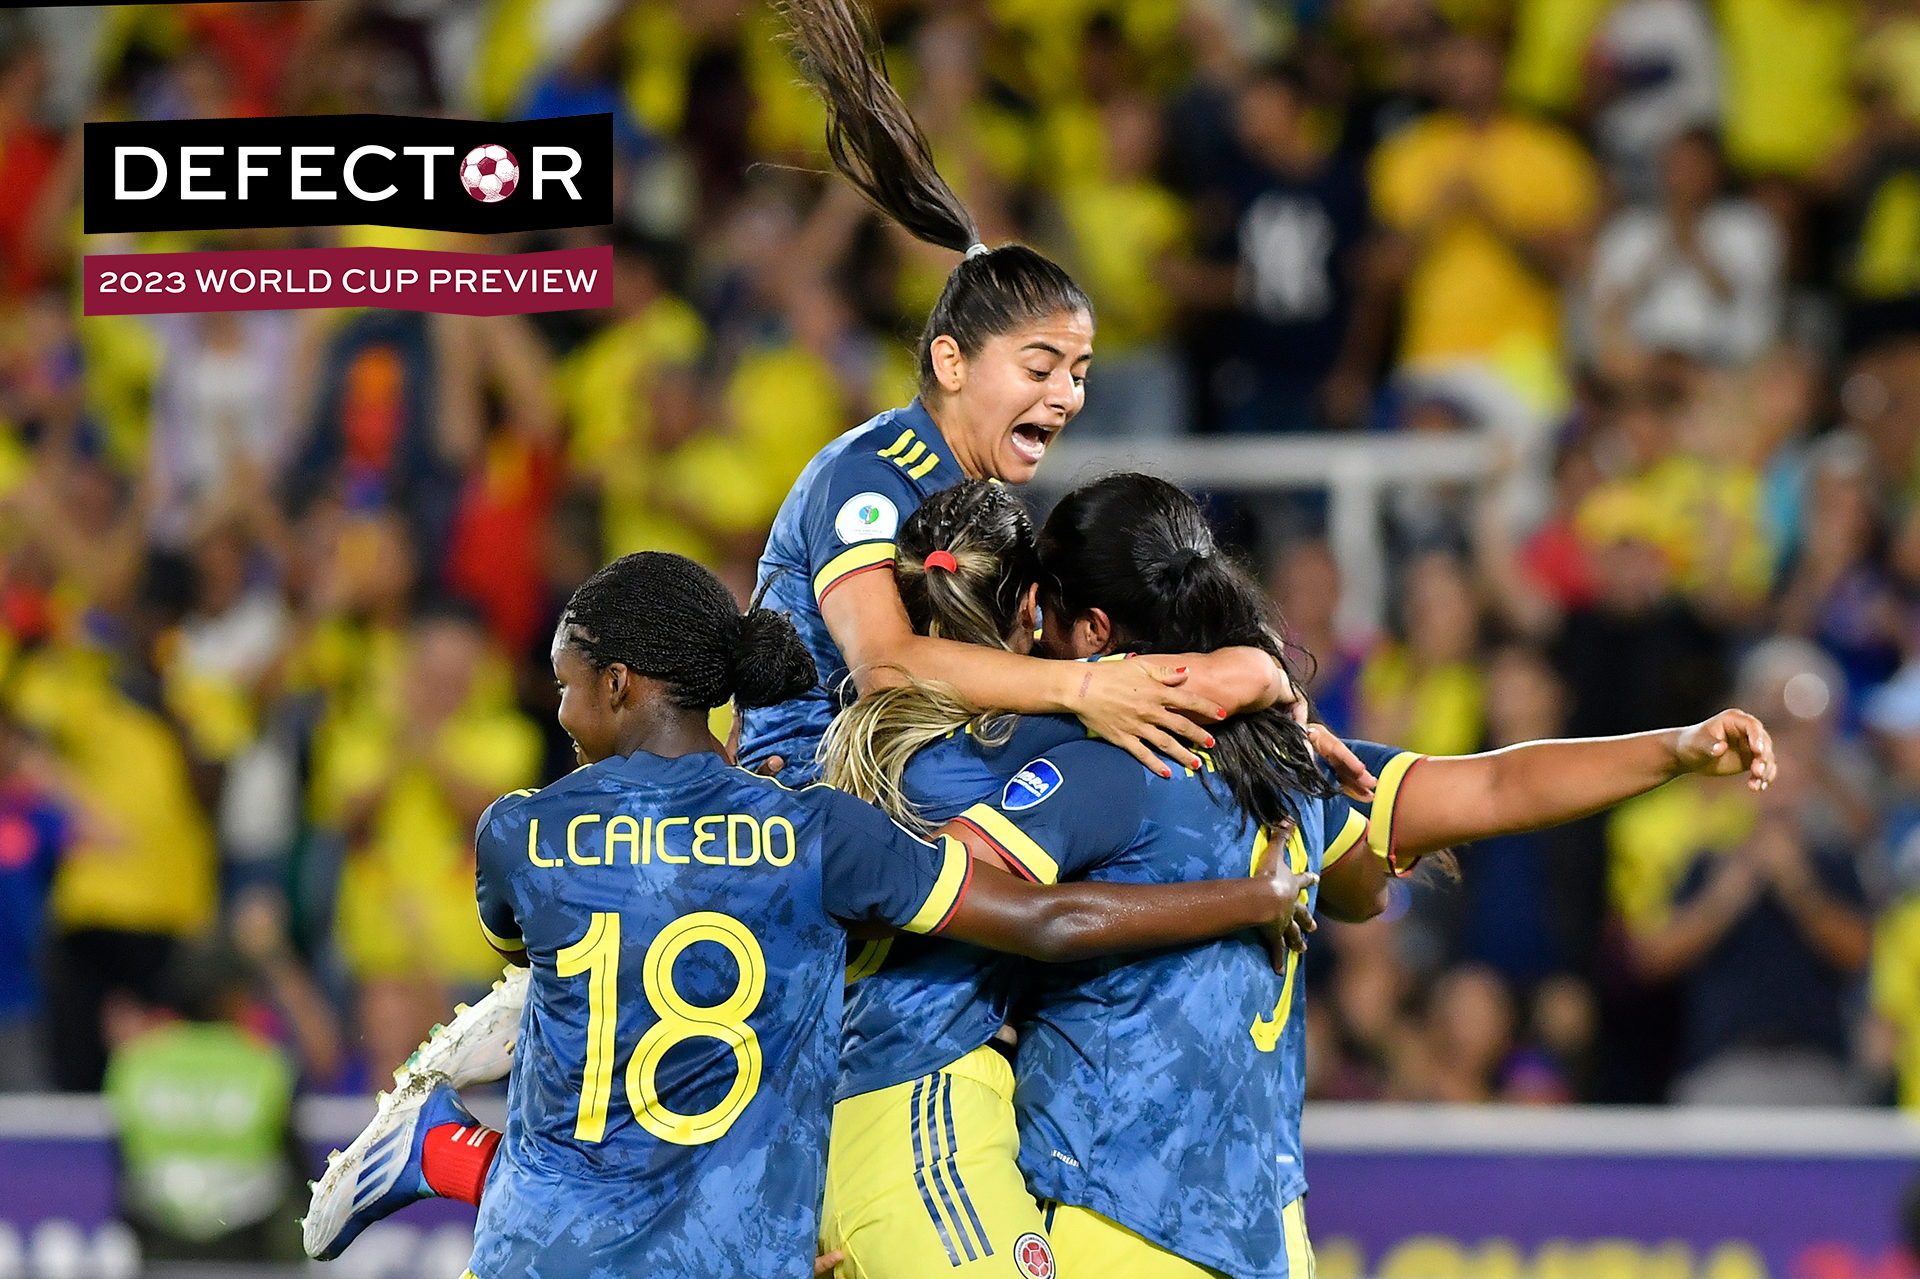 Mayra Ramirez (R) of Colombia celebrates with teammates after scoring the first goal of her team during a Group A match between Ecuador and Colombia as part of Women's CONMEBOL Copa America Colombia 2022 at Estadio Pascual Guerrero on July 17, 2022 in Cali, Colombia.